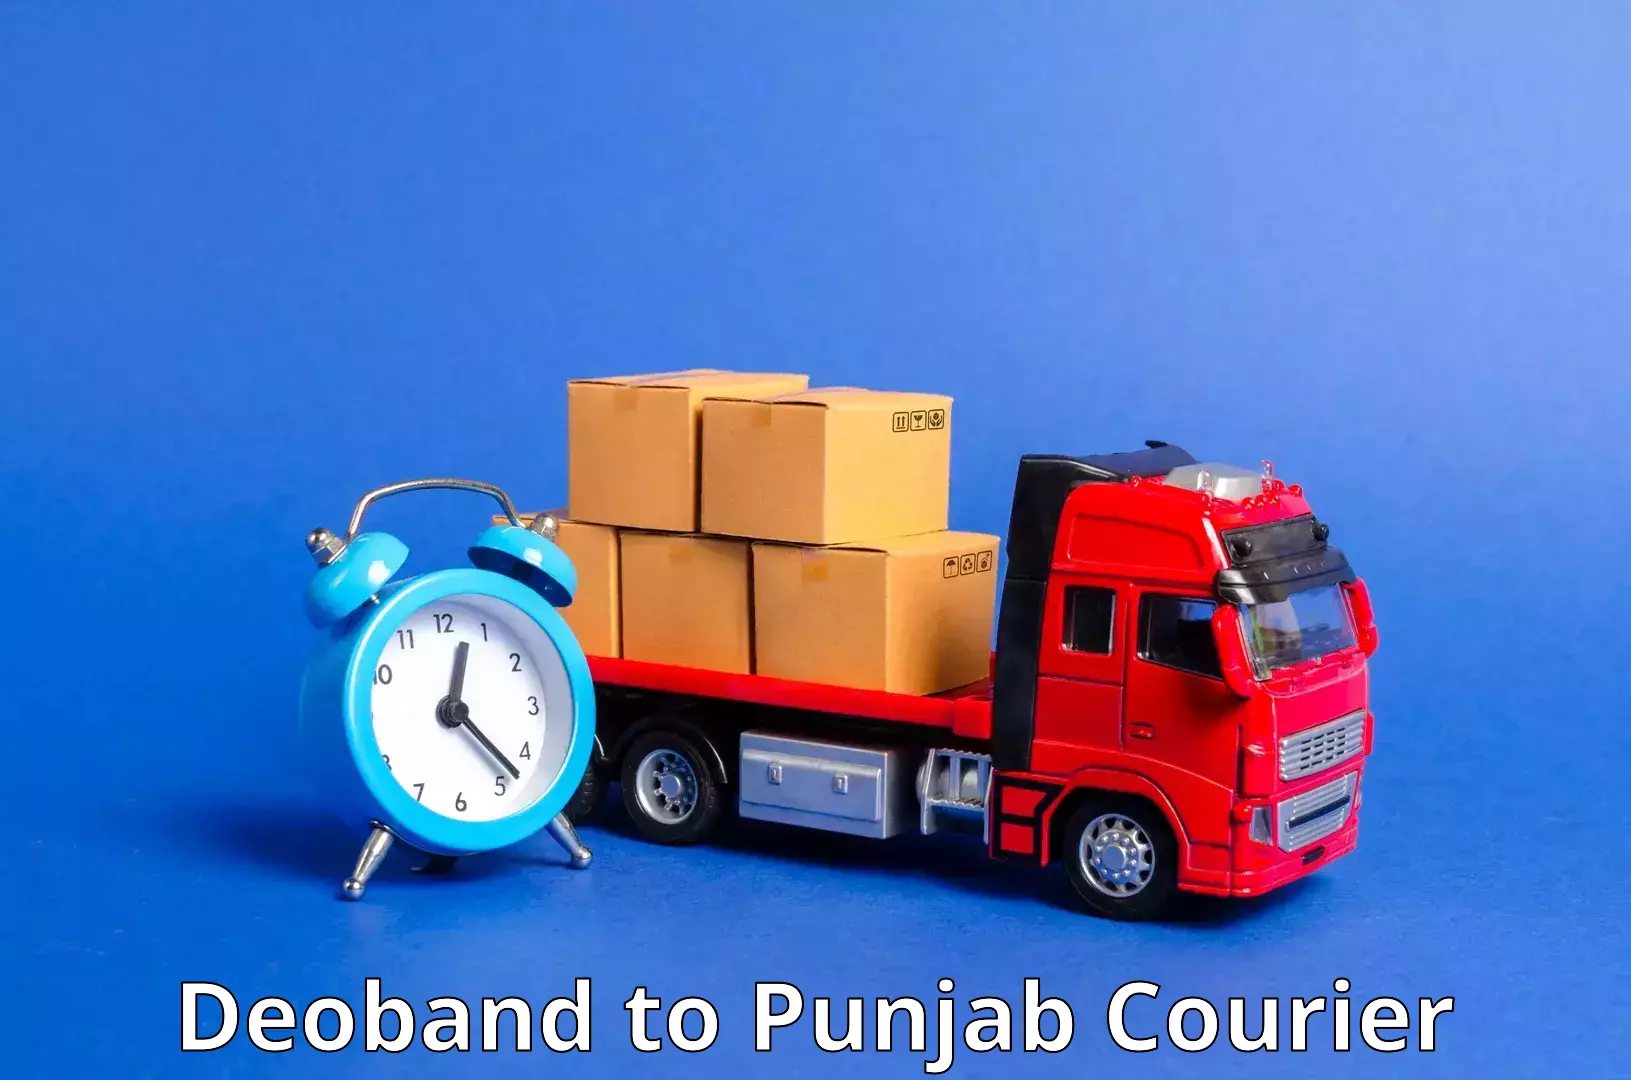 Delivery service partnership Deoband to Beas